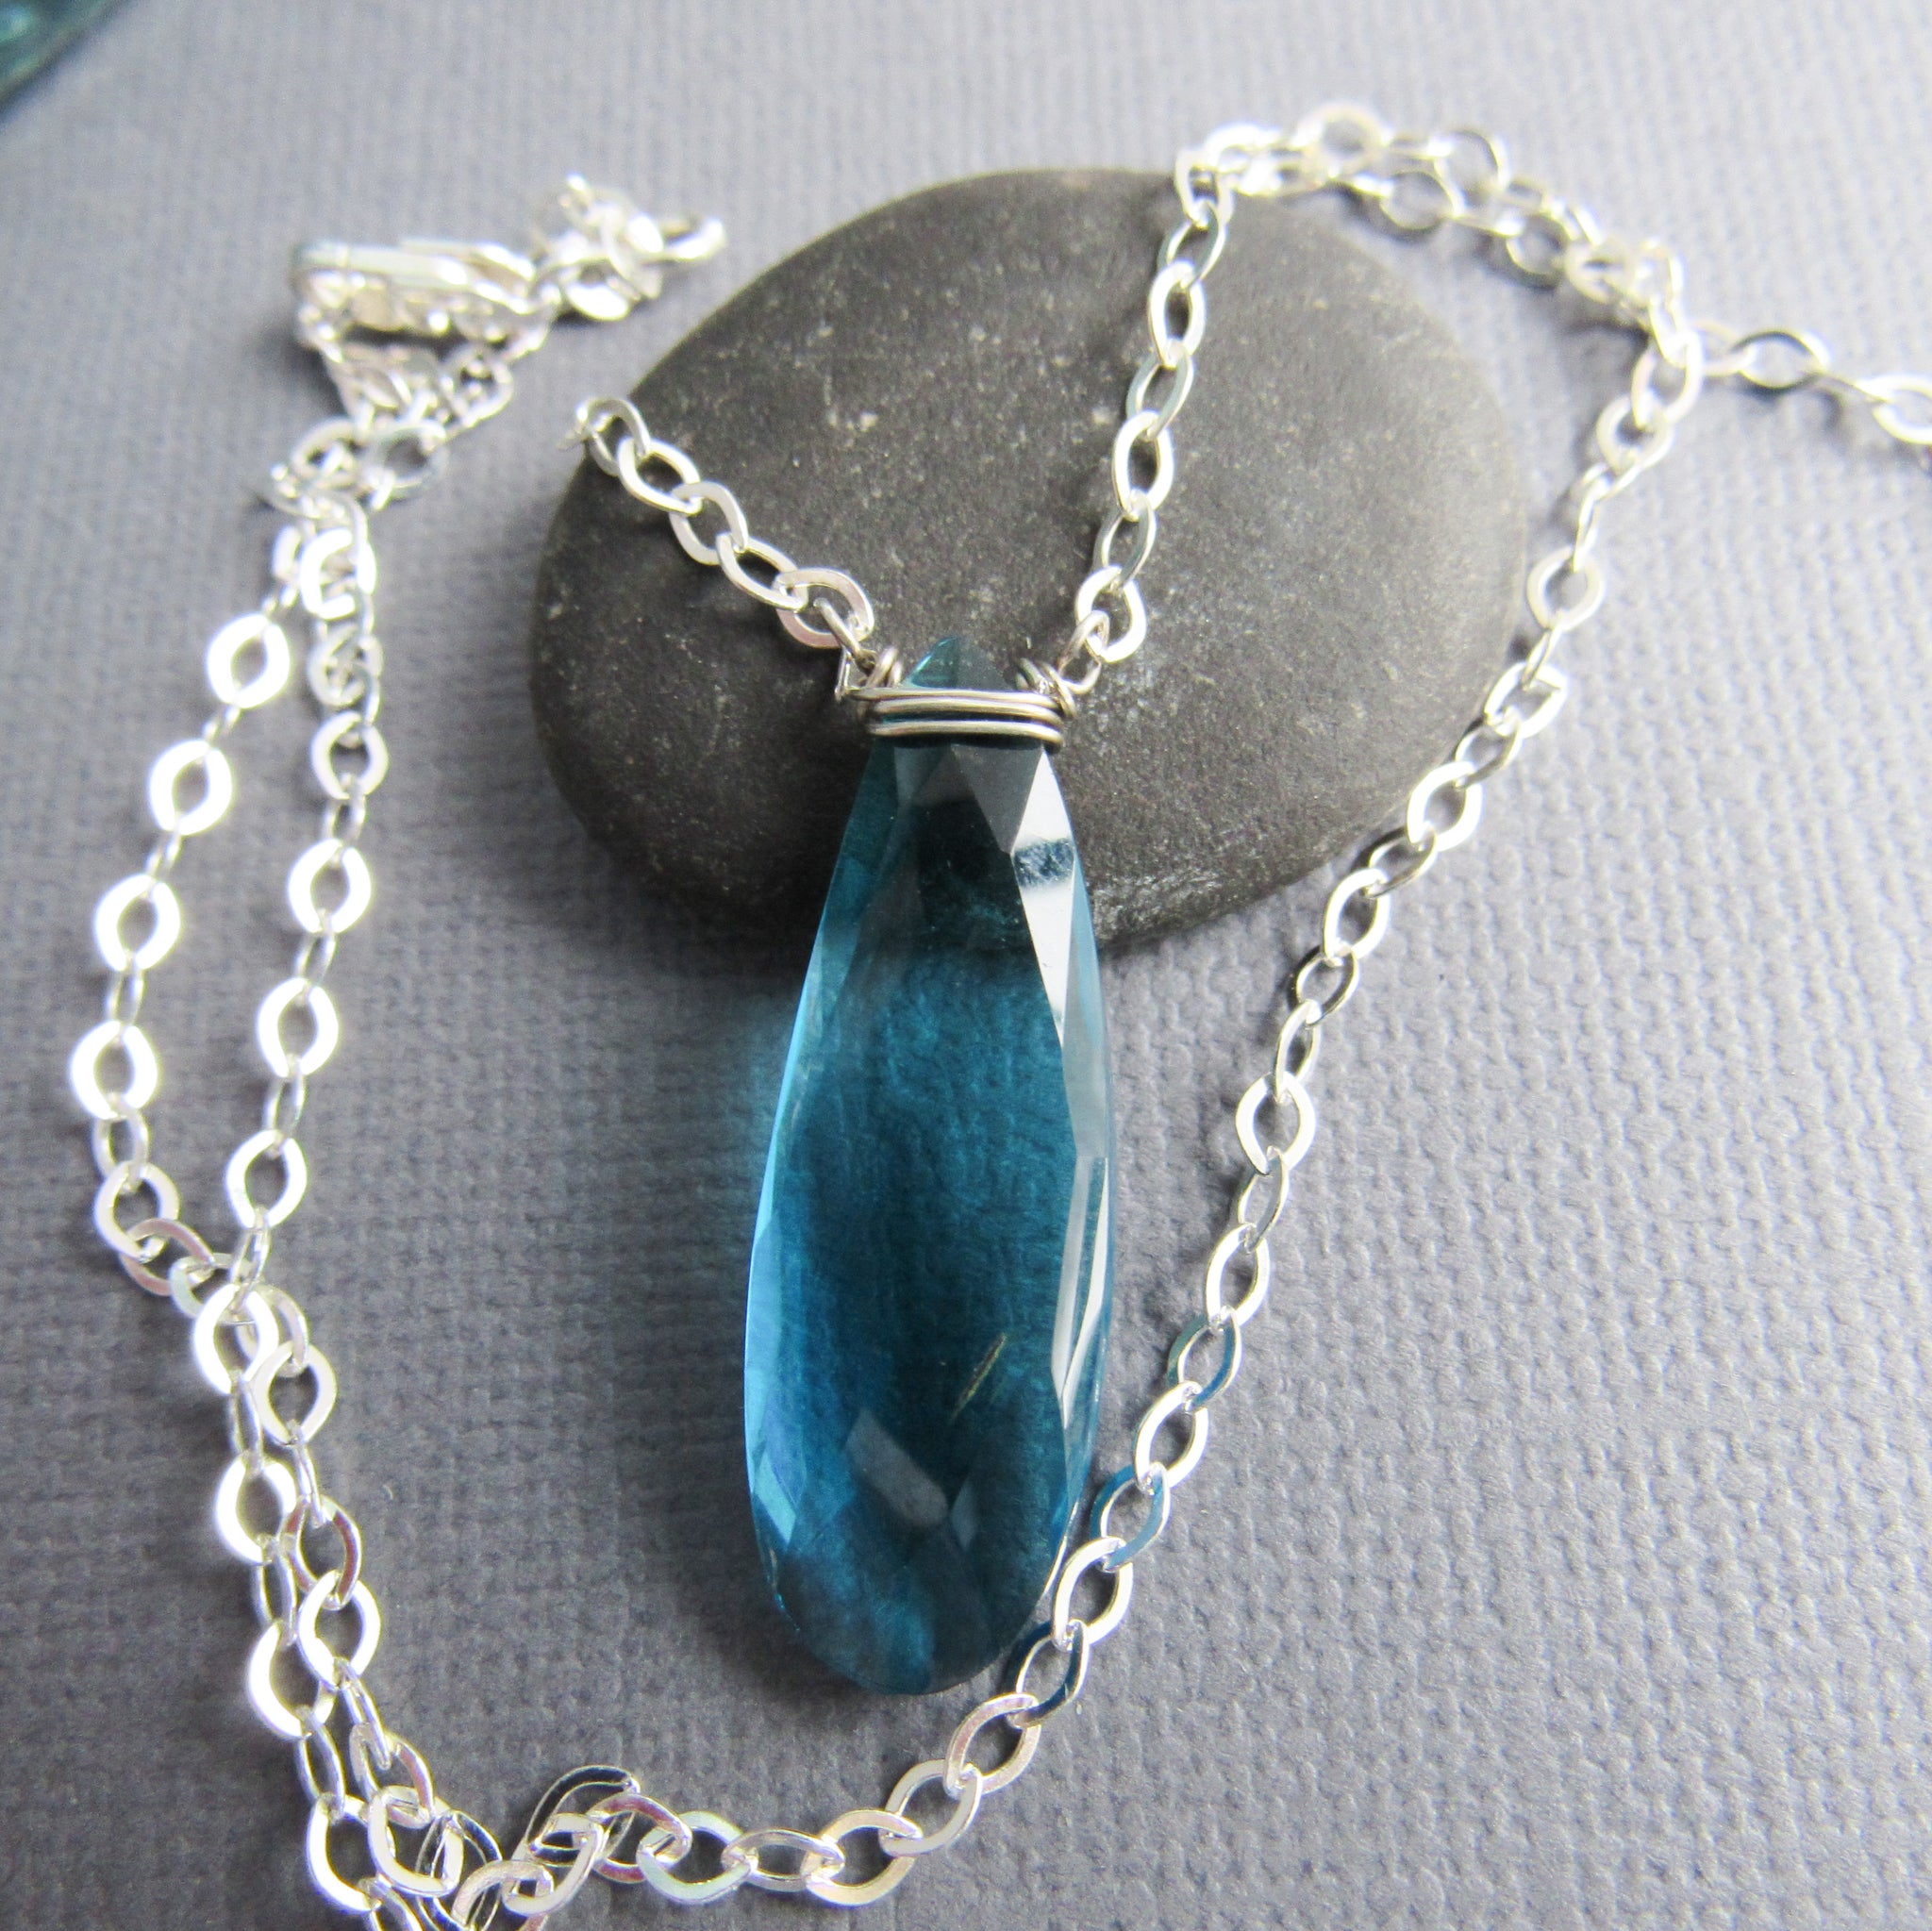 Deep Blue Quartz and Sterling Silver Necklace